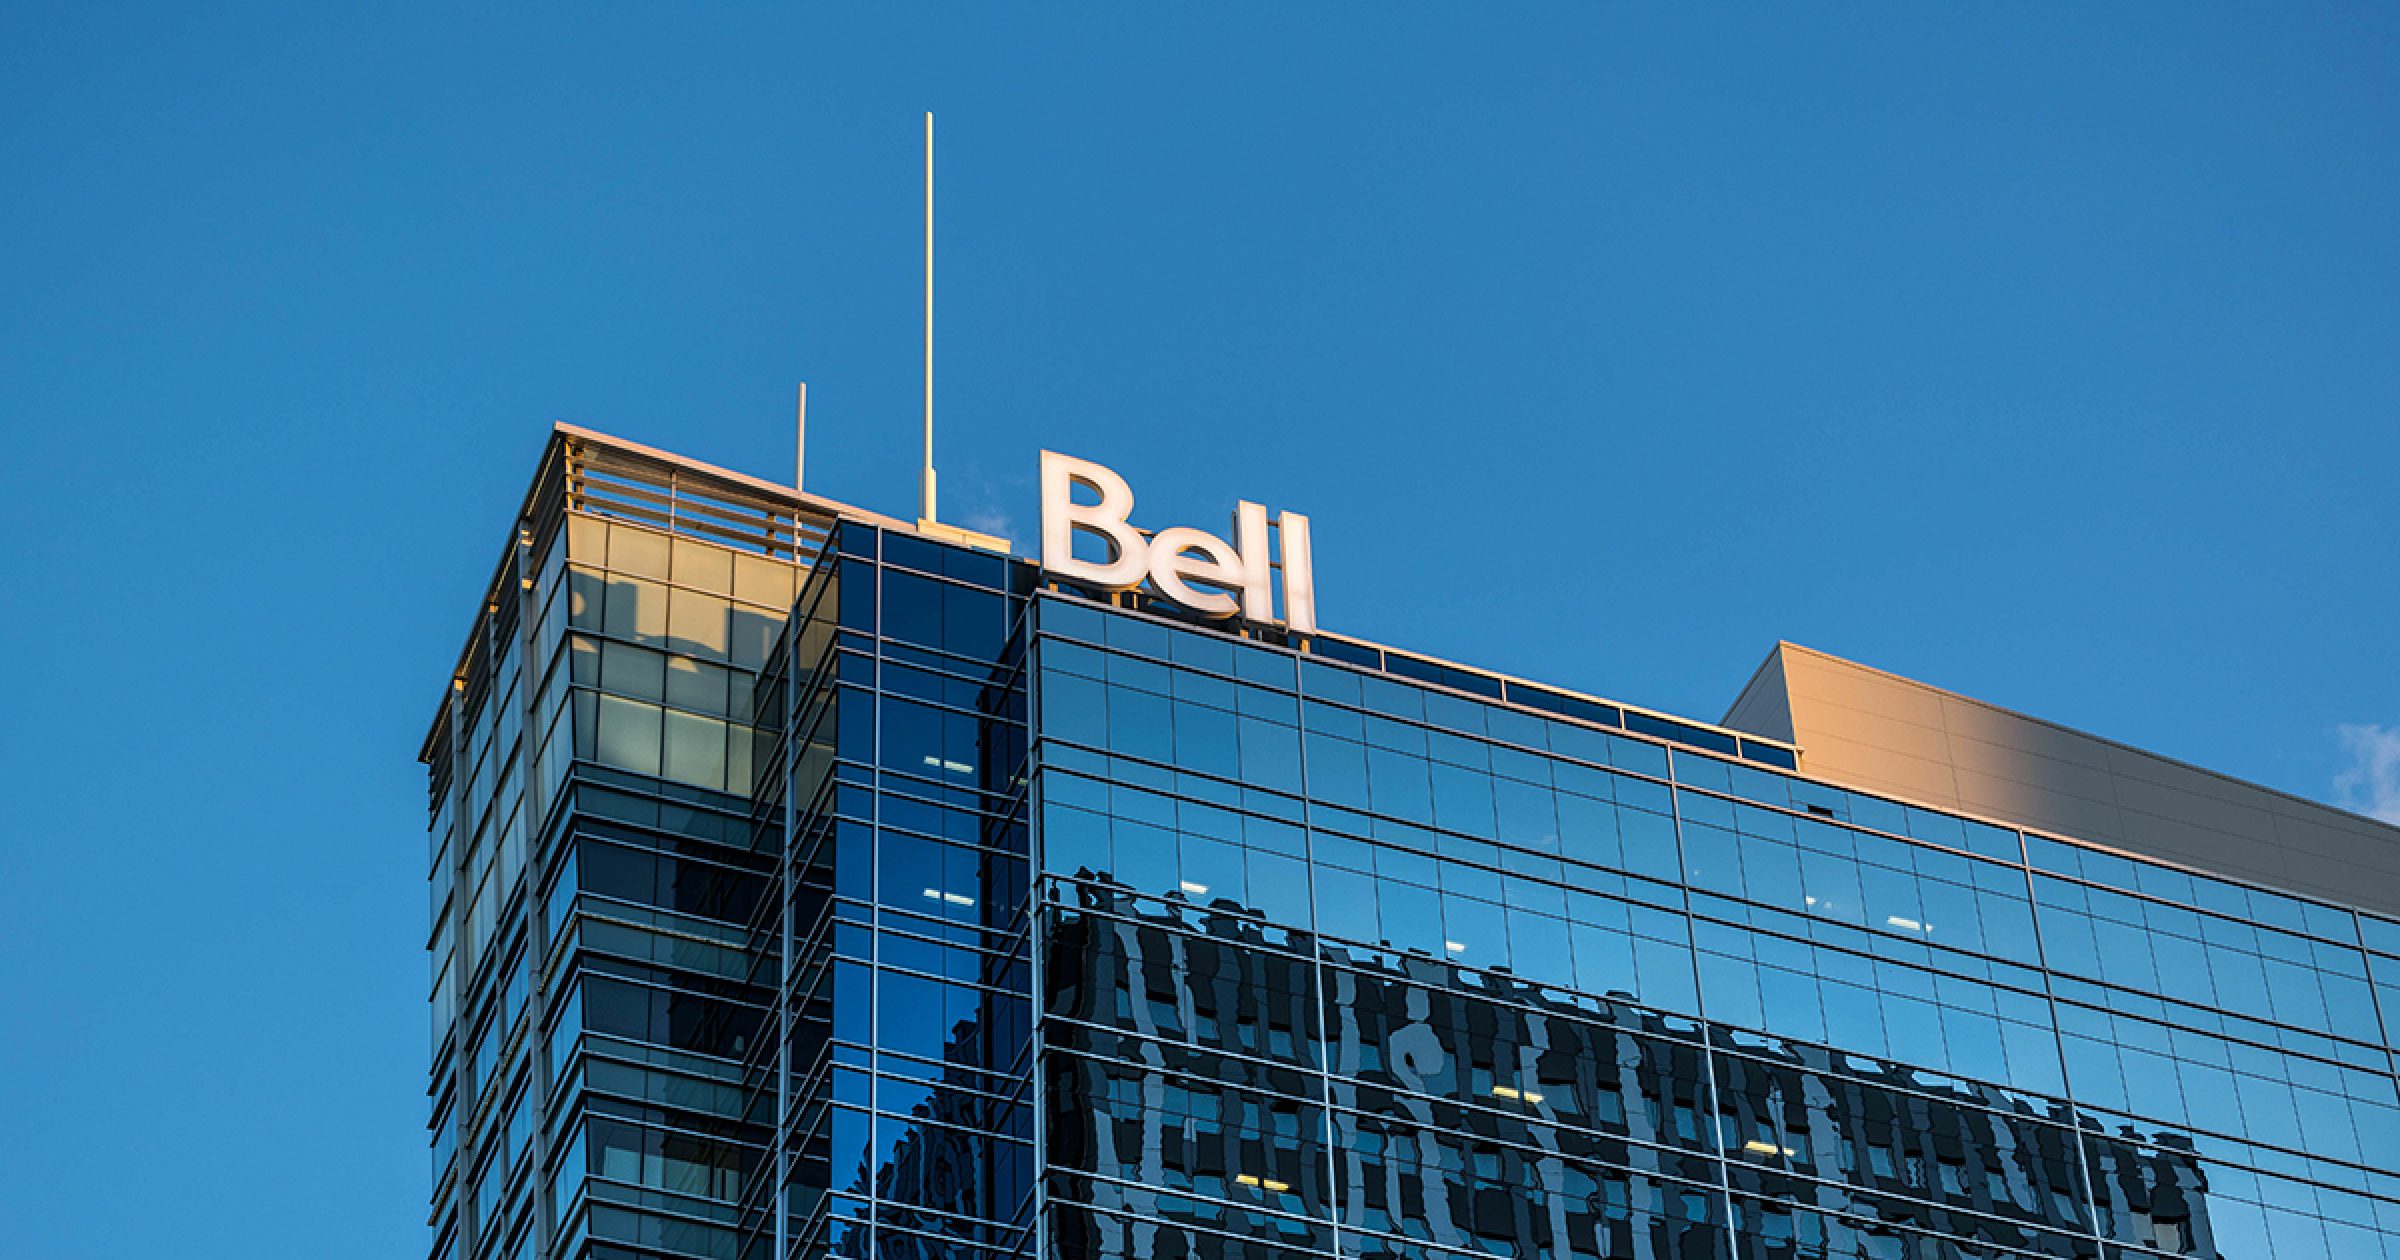 Bell corporate and business office in downtown Calgary with blue